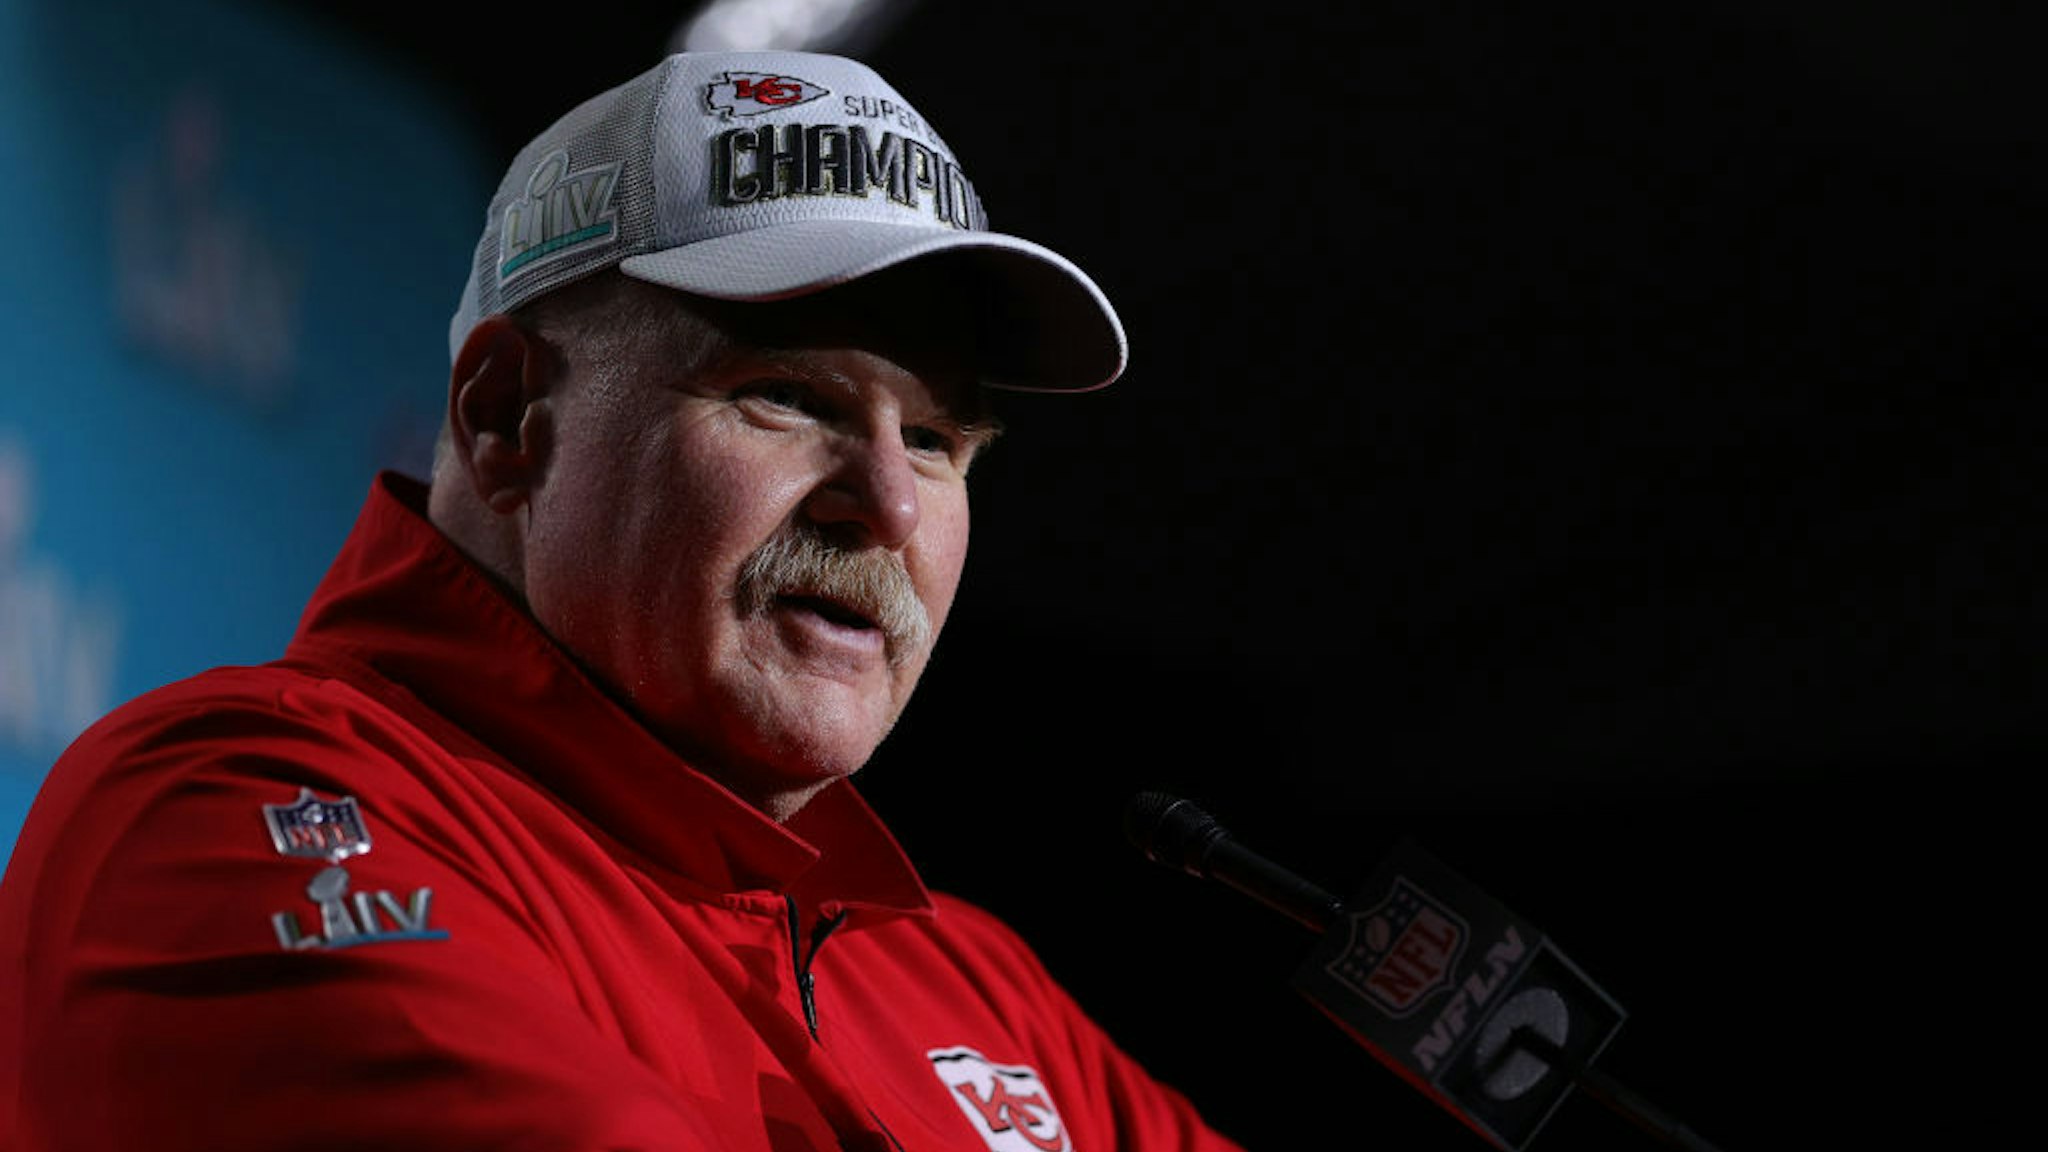 Head coach Andy Reid of the Kansas City Chiefs talks to press after defeating San Francisco 49ers by 31 - 20 in Super Bowl LIV at Hard Rock Stadium on February 02, 2020 in Miami, Florida. (Photo by Maddie Meyer/Getty Images)